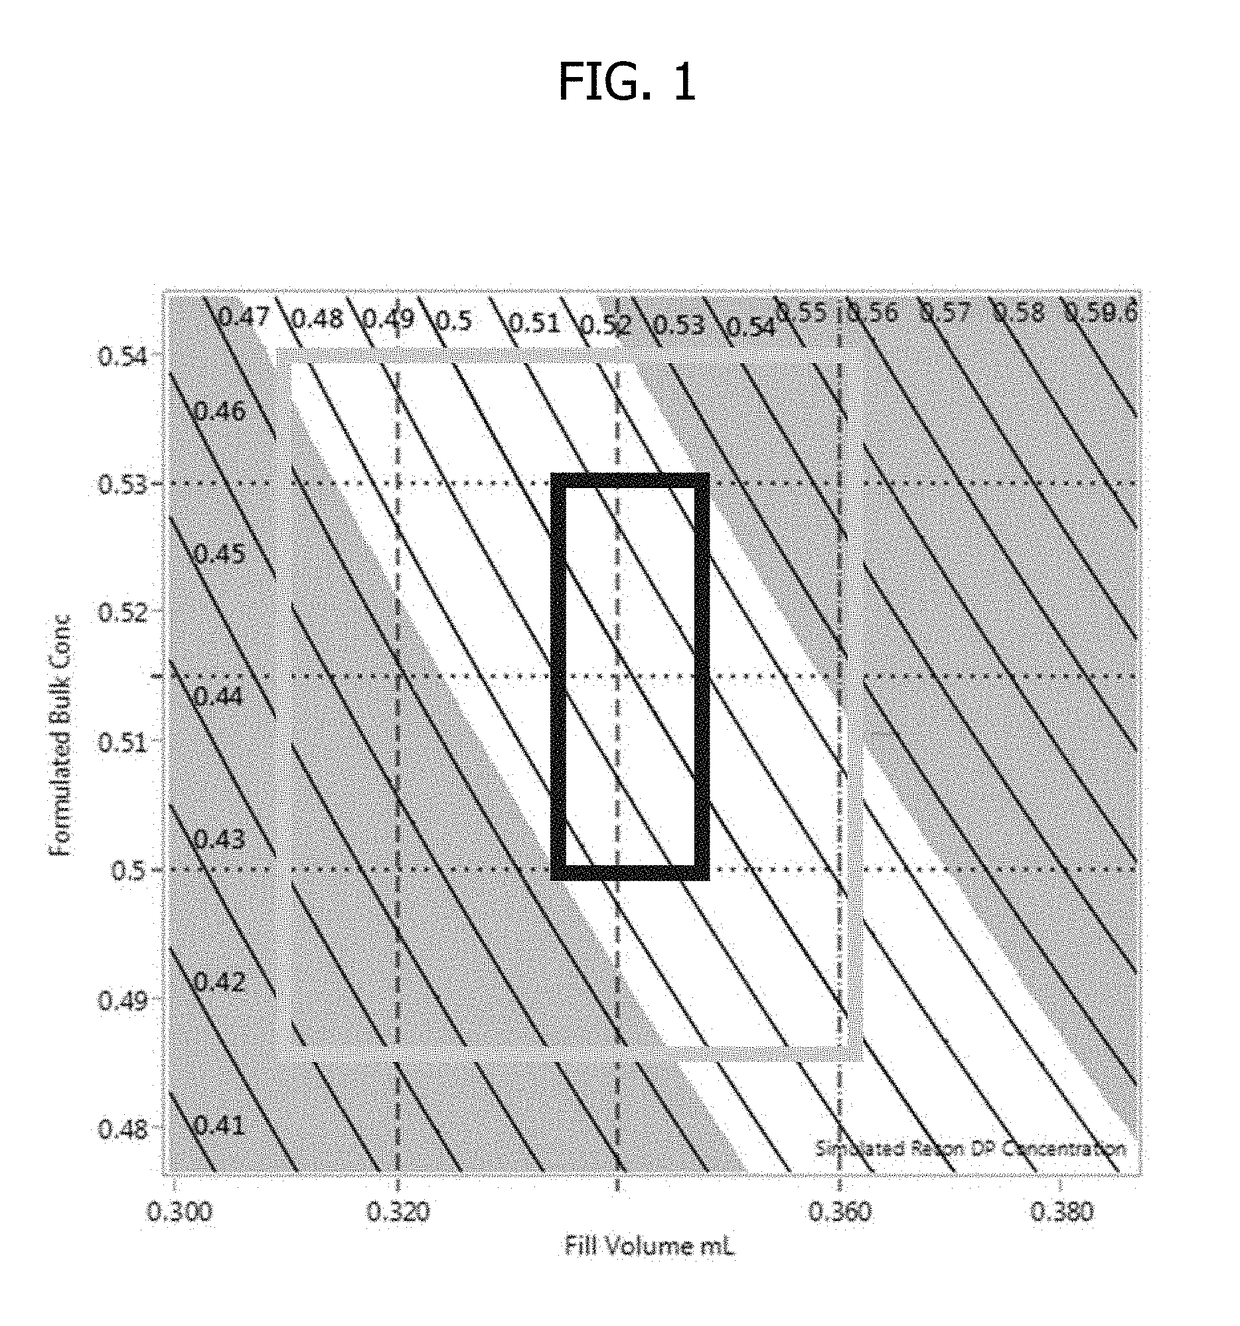 Process for lyophilized pharmaceutical formulation of a therapeutic protein